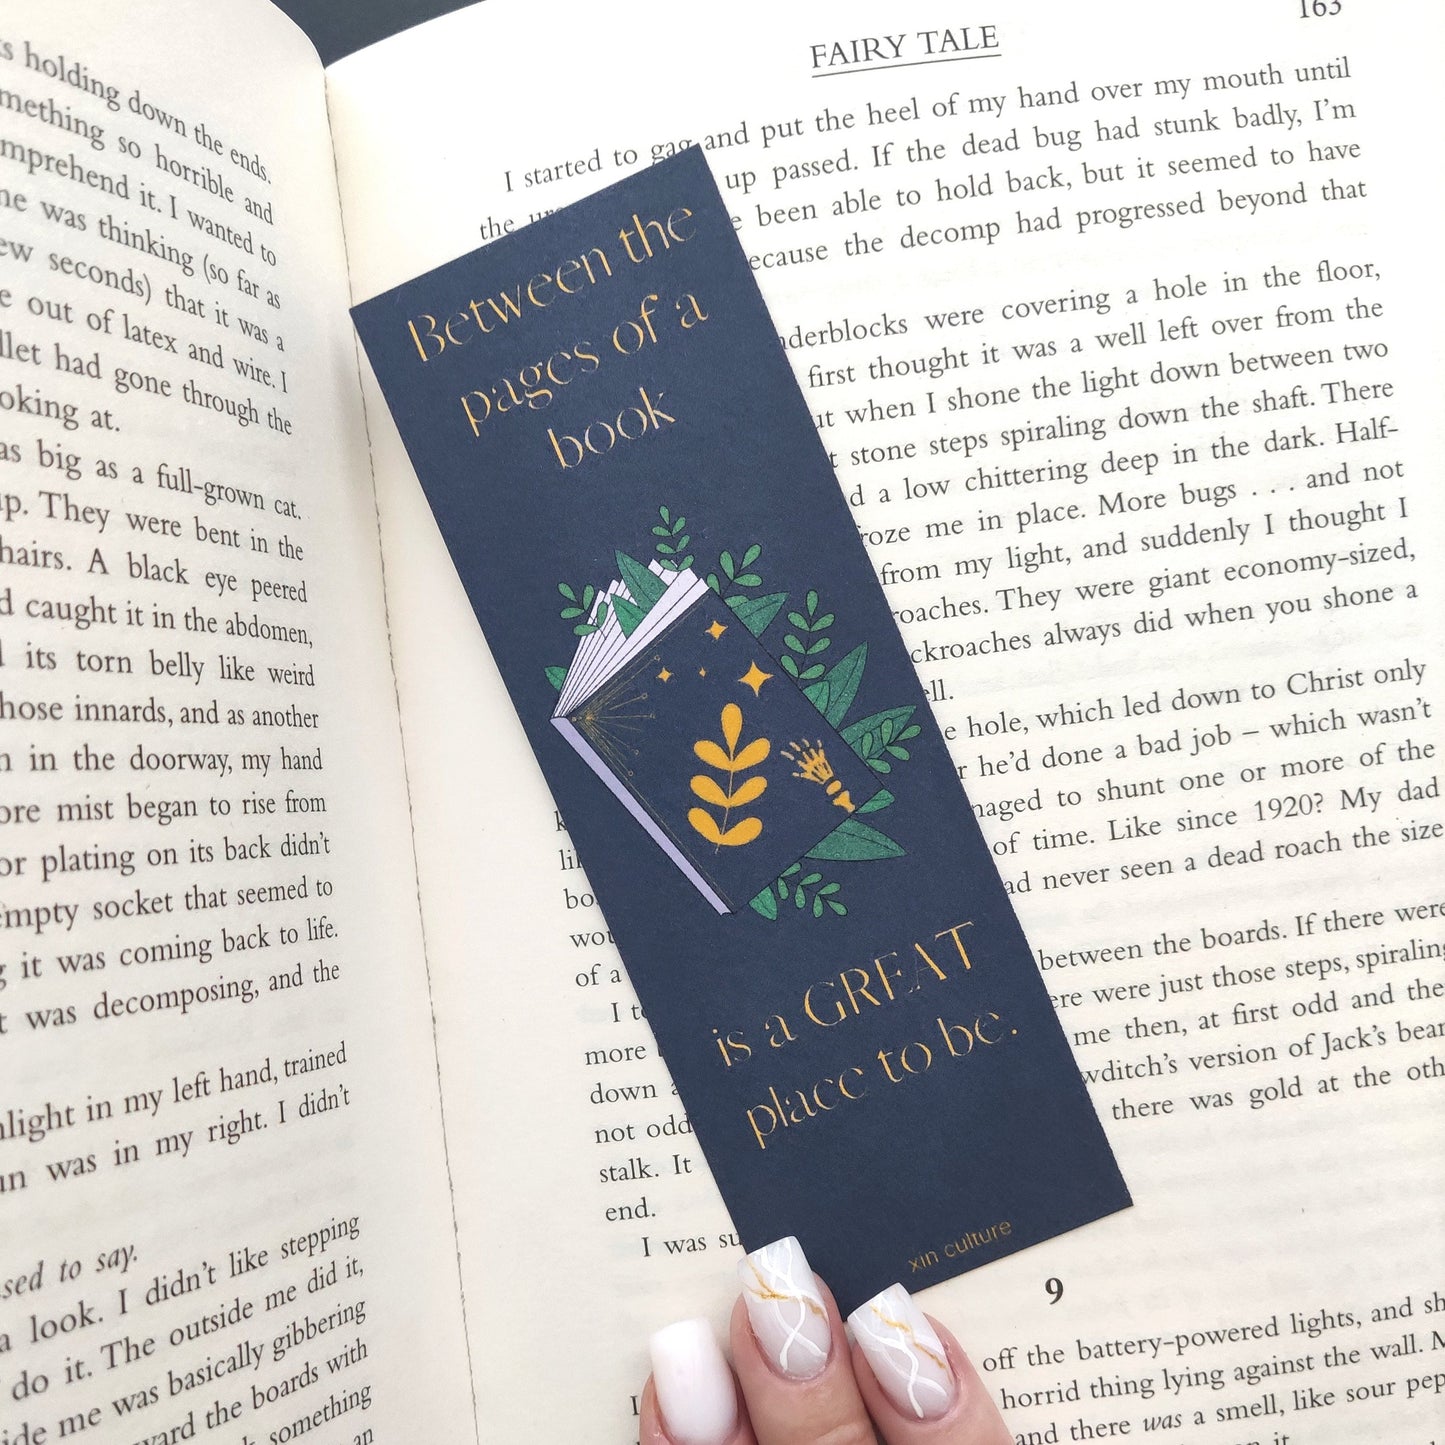 "Between the pages of a book" bookmark